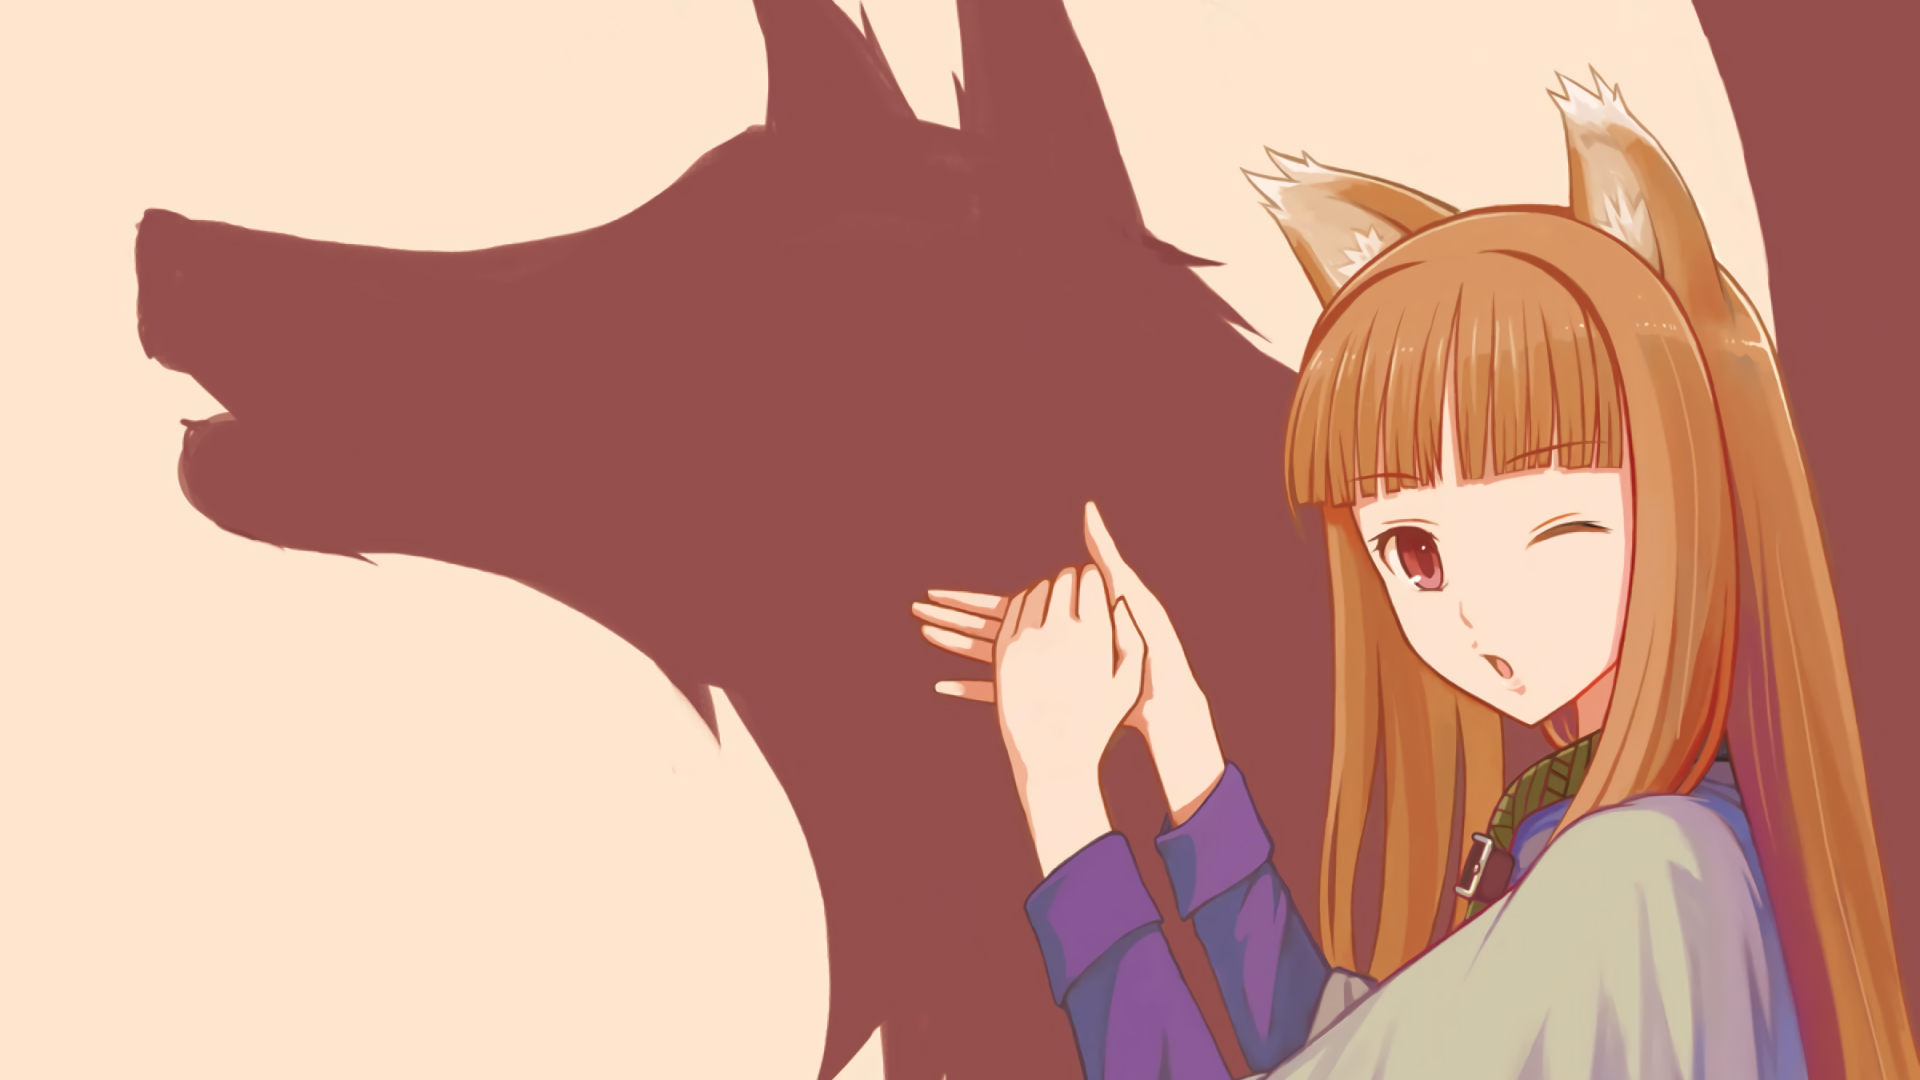 Anime 1920x1080 wolf anime Spice and Wolf Holo (Spice and Wolf) wolf girls anime girls